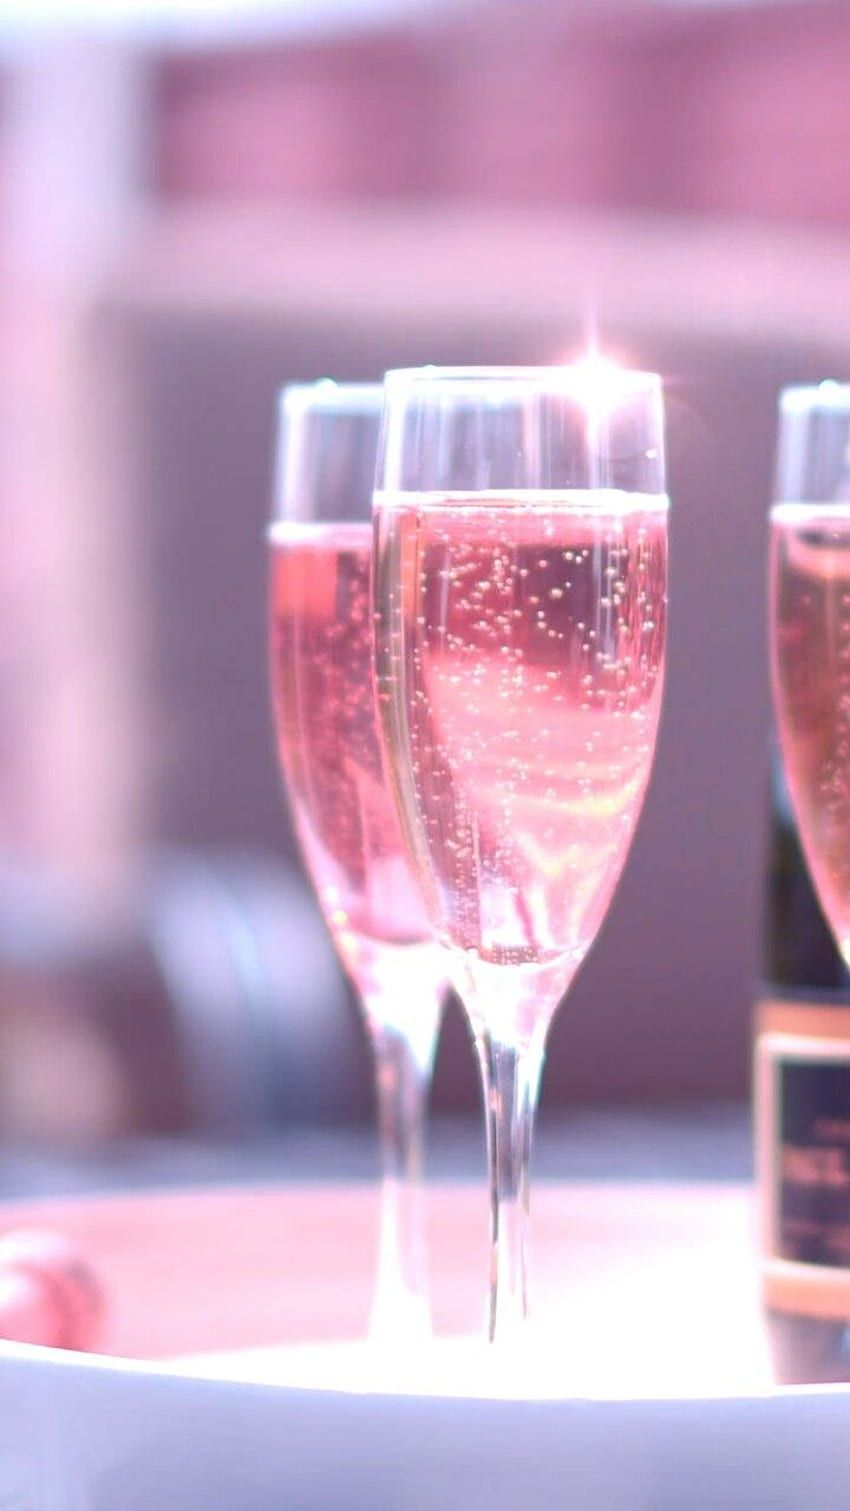 Two glasses of pink champagne sitting on a tray. - Champagne